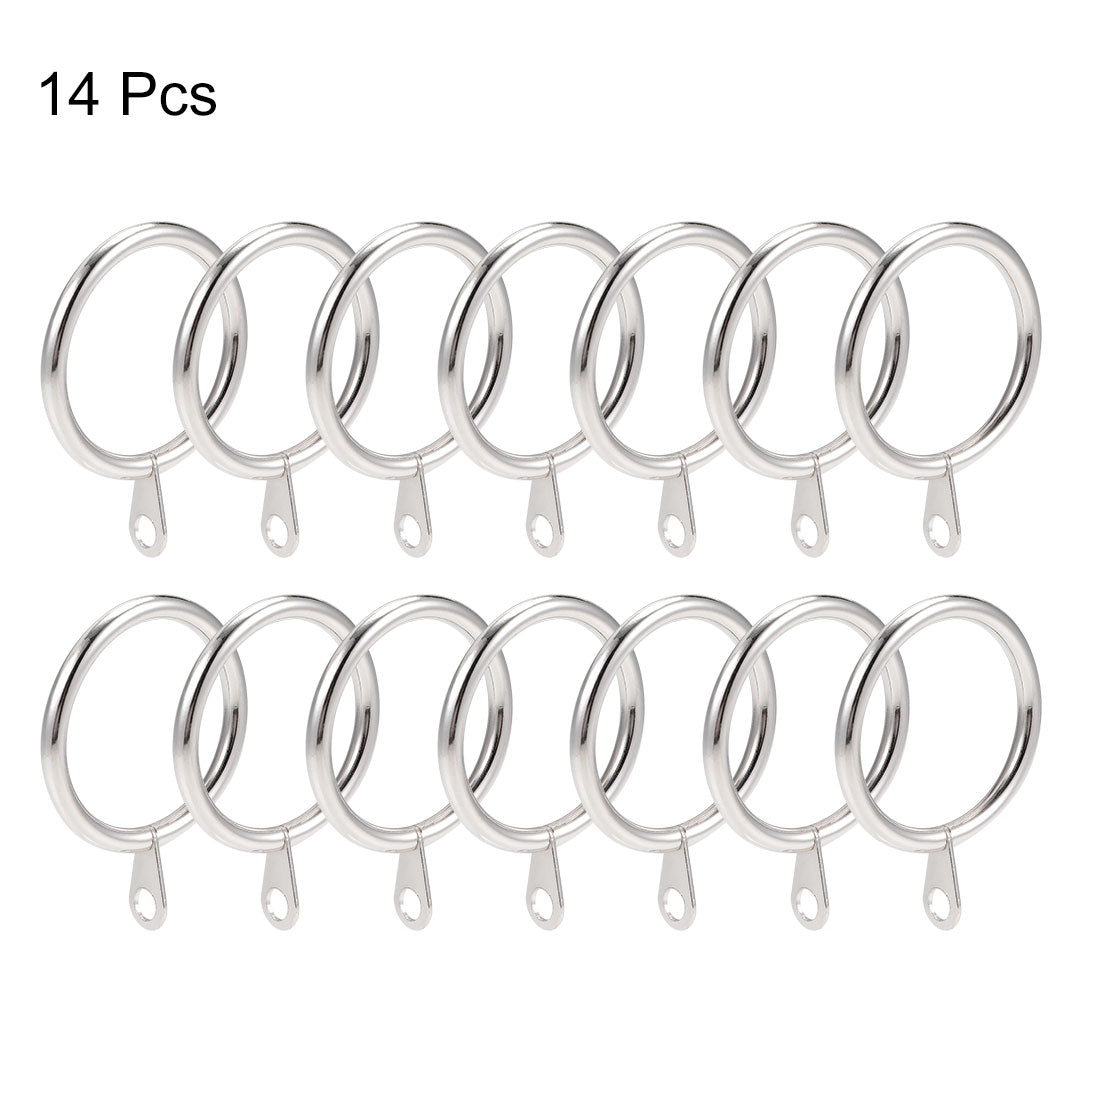 uxcell Uxcell Curtain Rings Metal 32mm Inner Dia Drapery Ring for Curtain Rods Silver Tone 14 Pcs